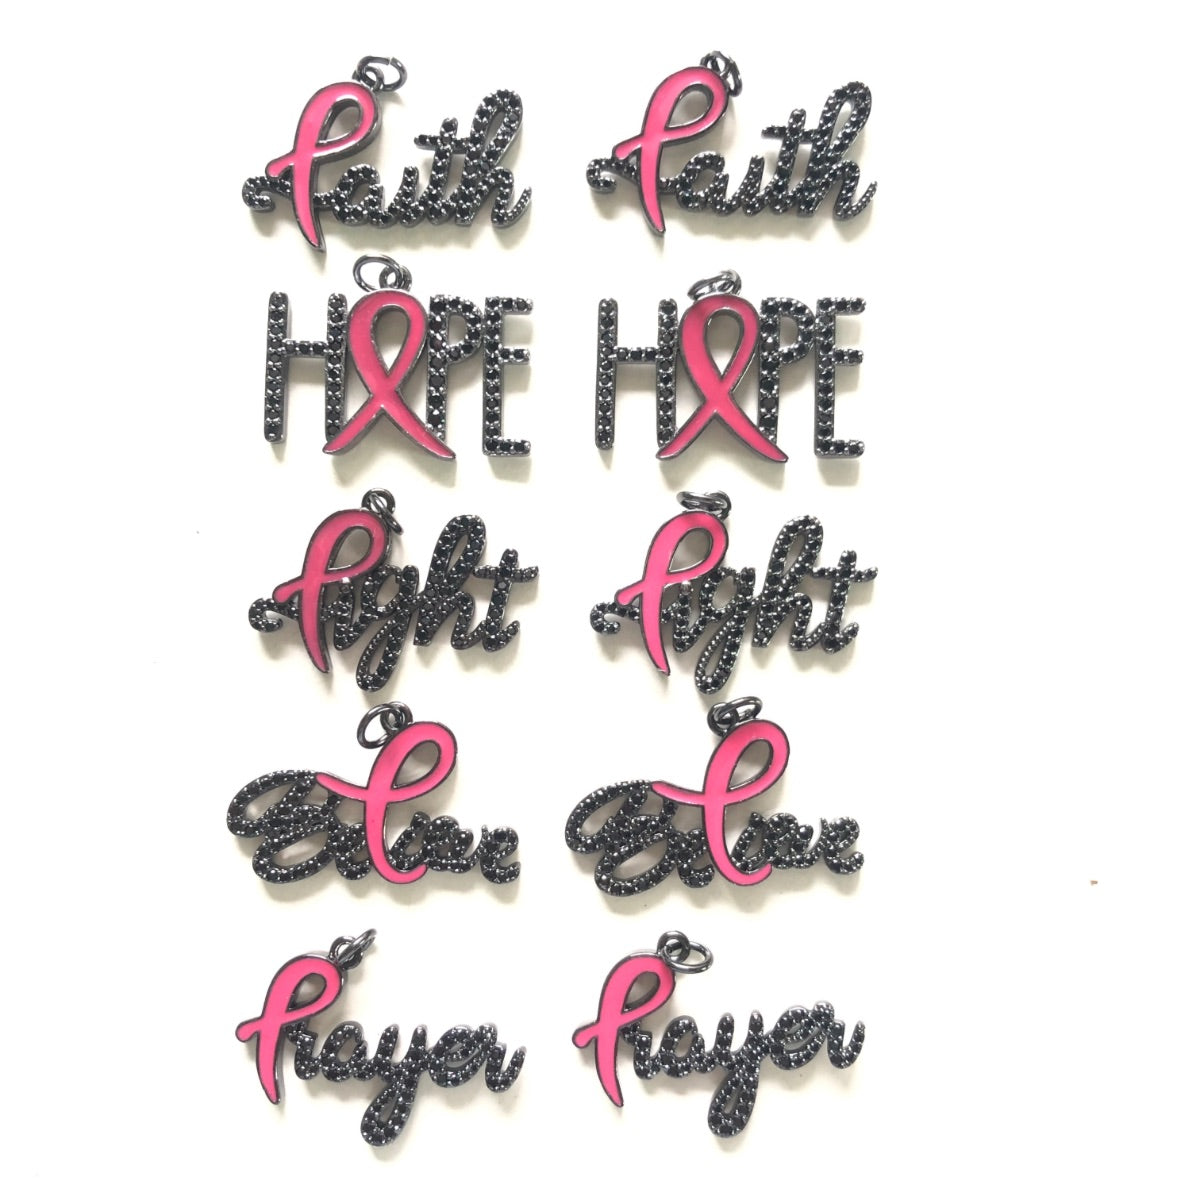 10pcs/lot CZ Pave Pink Ribbon Faith Hope Fight Brave Prayer Breast Cancer Awareness Word Charms Bundle Black on Black Set CZ Paved Charms Breast Cancer Awareness Mix Charms New Charms Arrivals Charms Beads Beyond